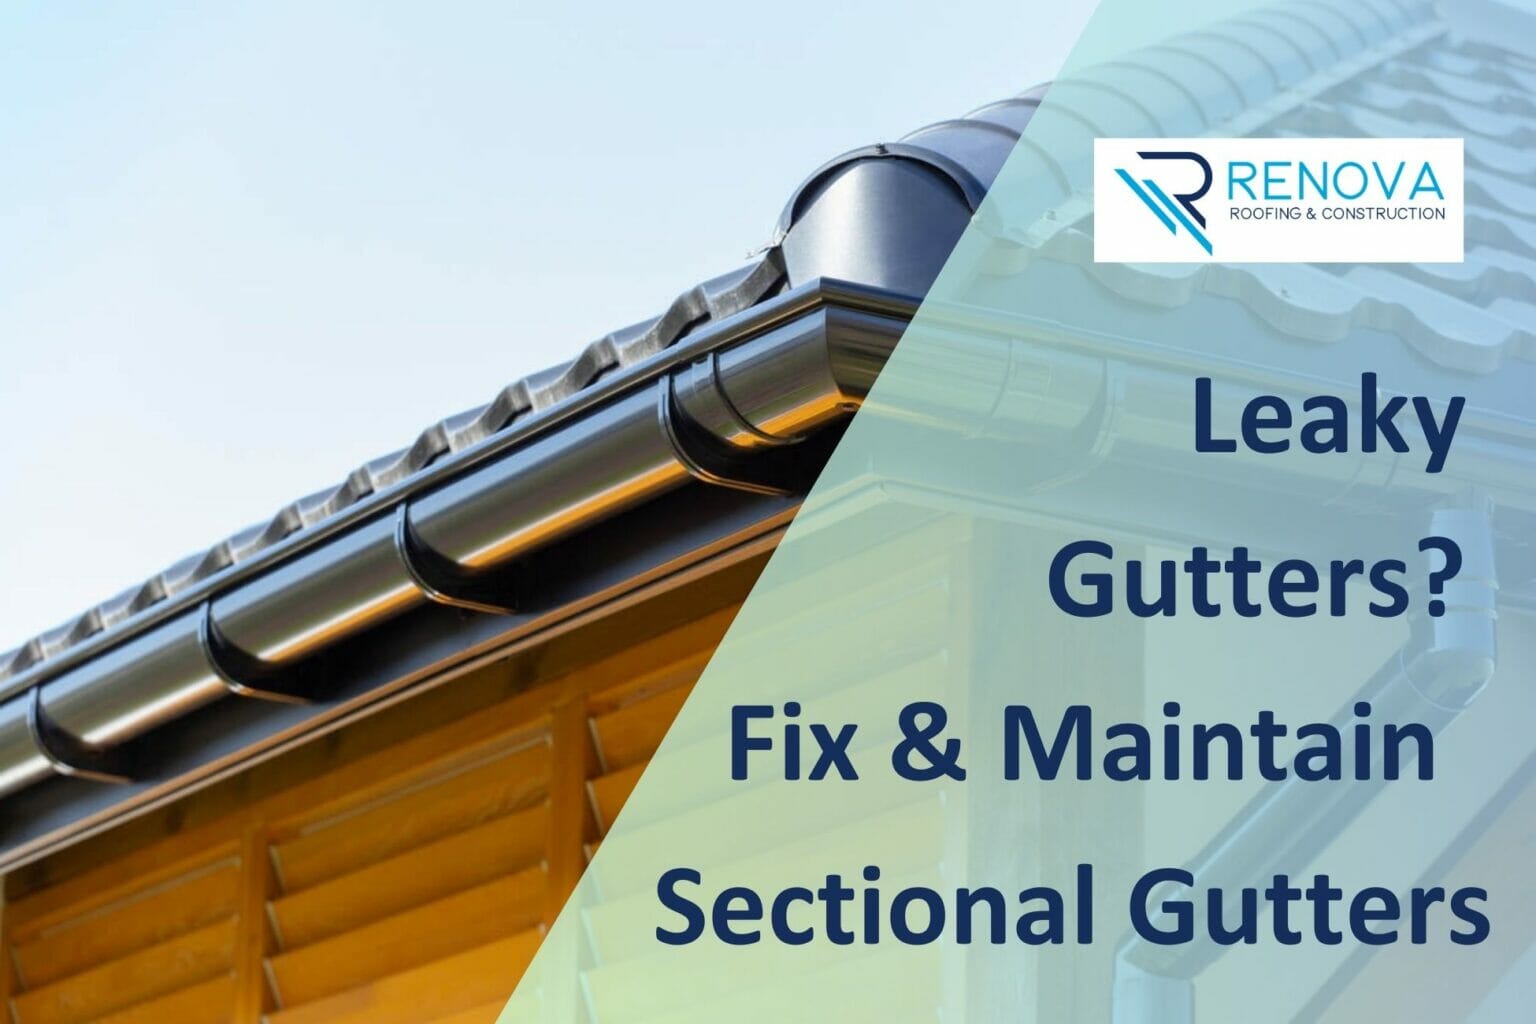 Leaky Gutters? Discover How to Fix and Maintain Your Sectional Gutters Like a Pro!